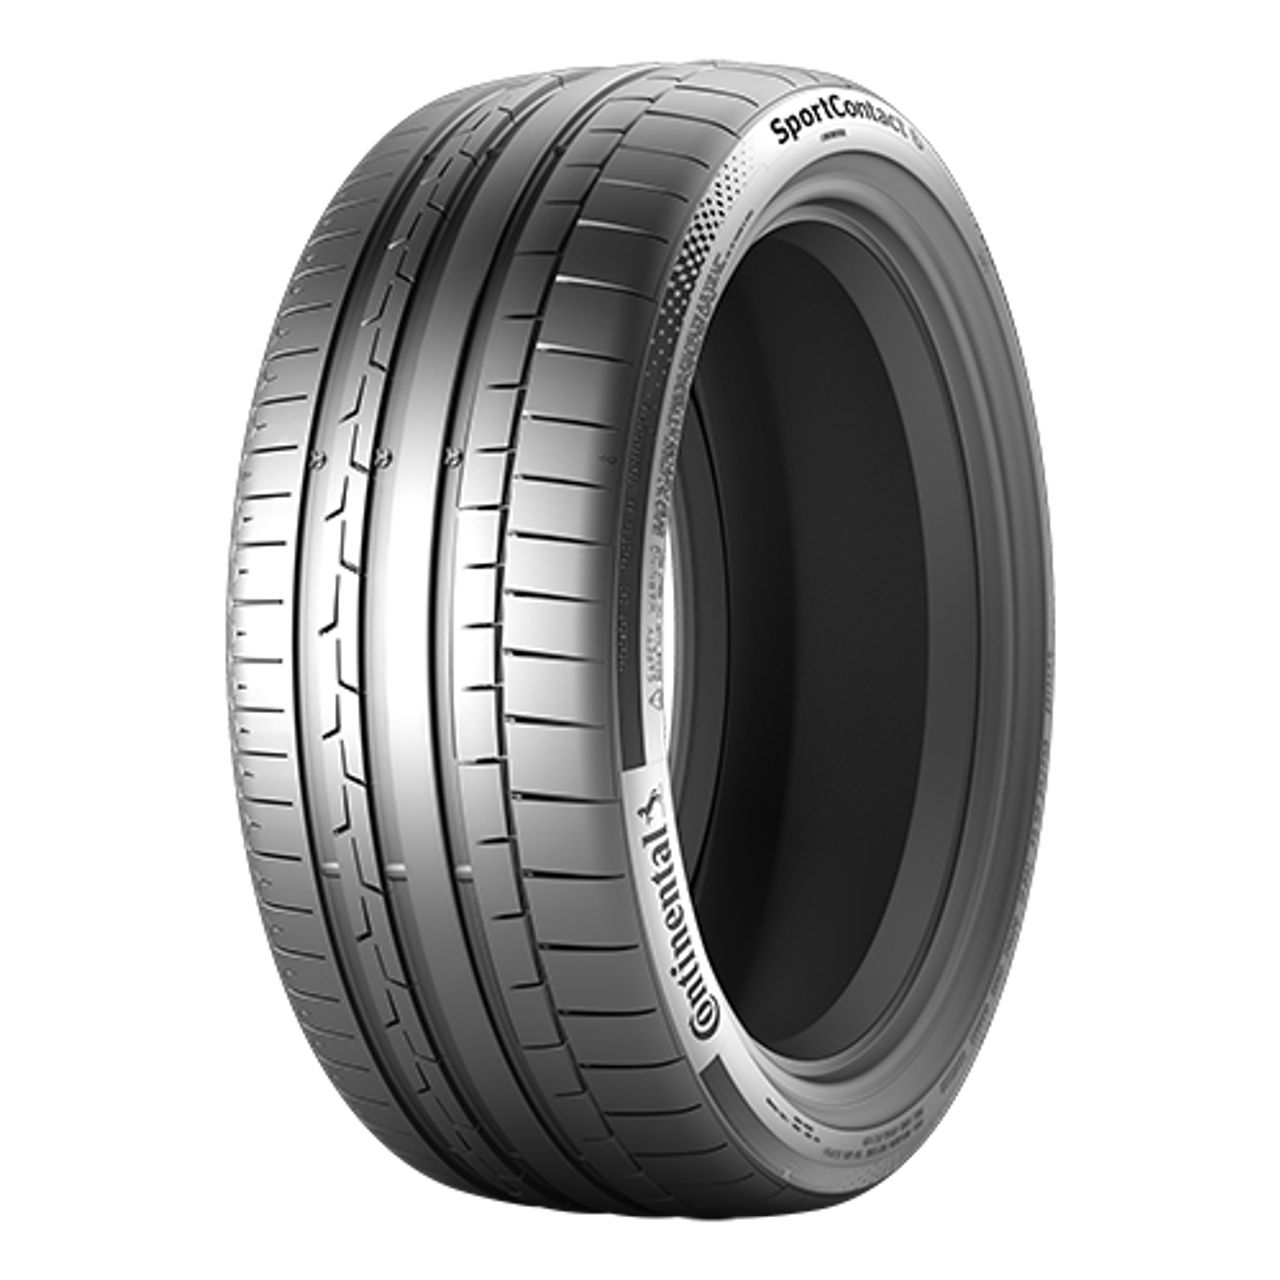 CONTINENTAL SPORTCONTACT 6 (AO) (EVc) 285/40R22 110Y CONTISILENT FR XL